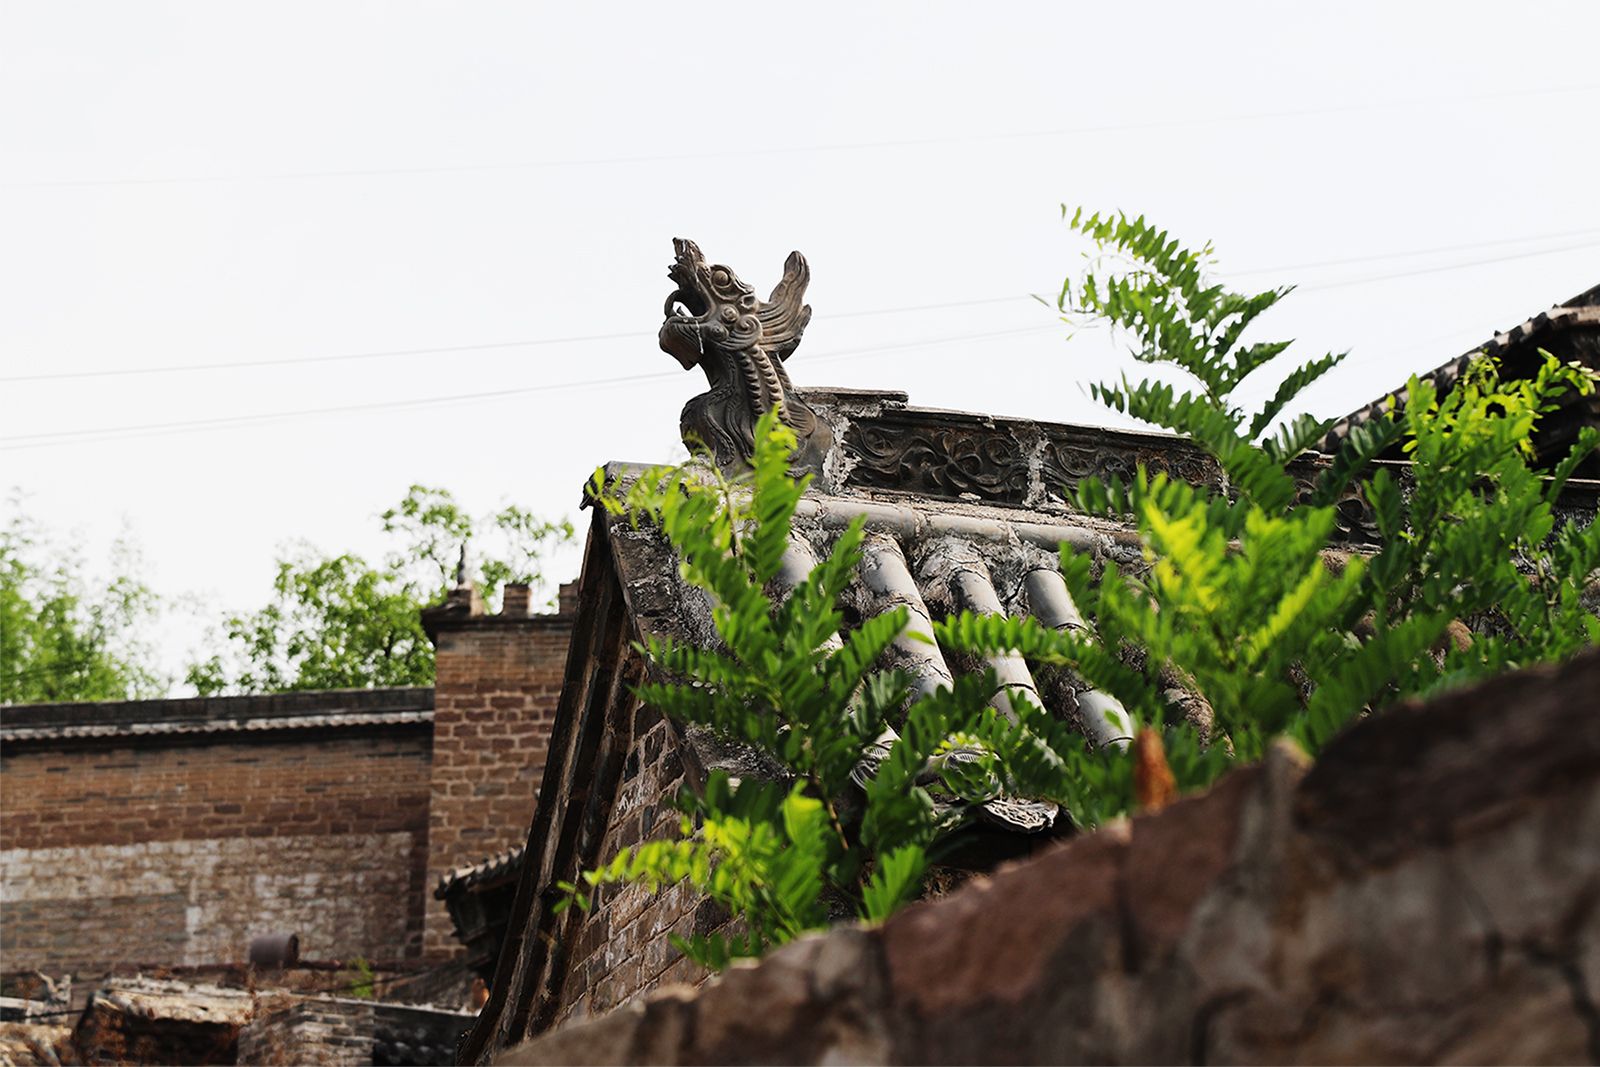 The roofs of houses in Lijiashan Village feature elaborate stone carvings. /CGTN